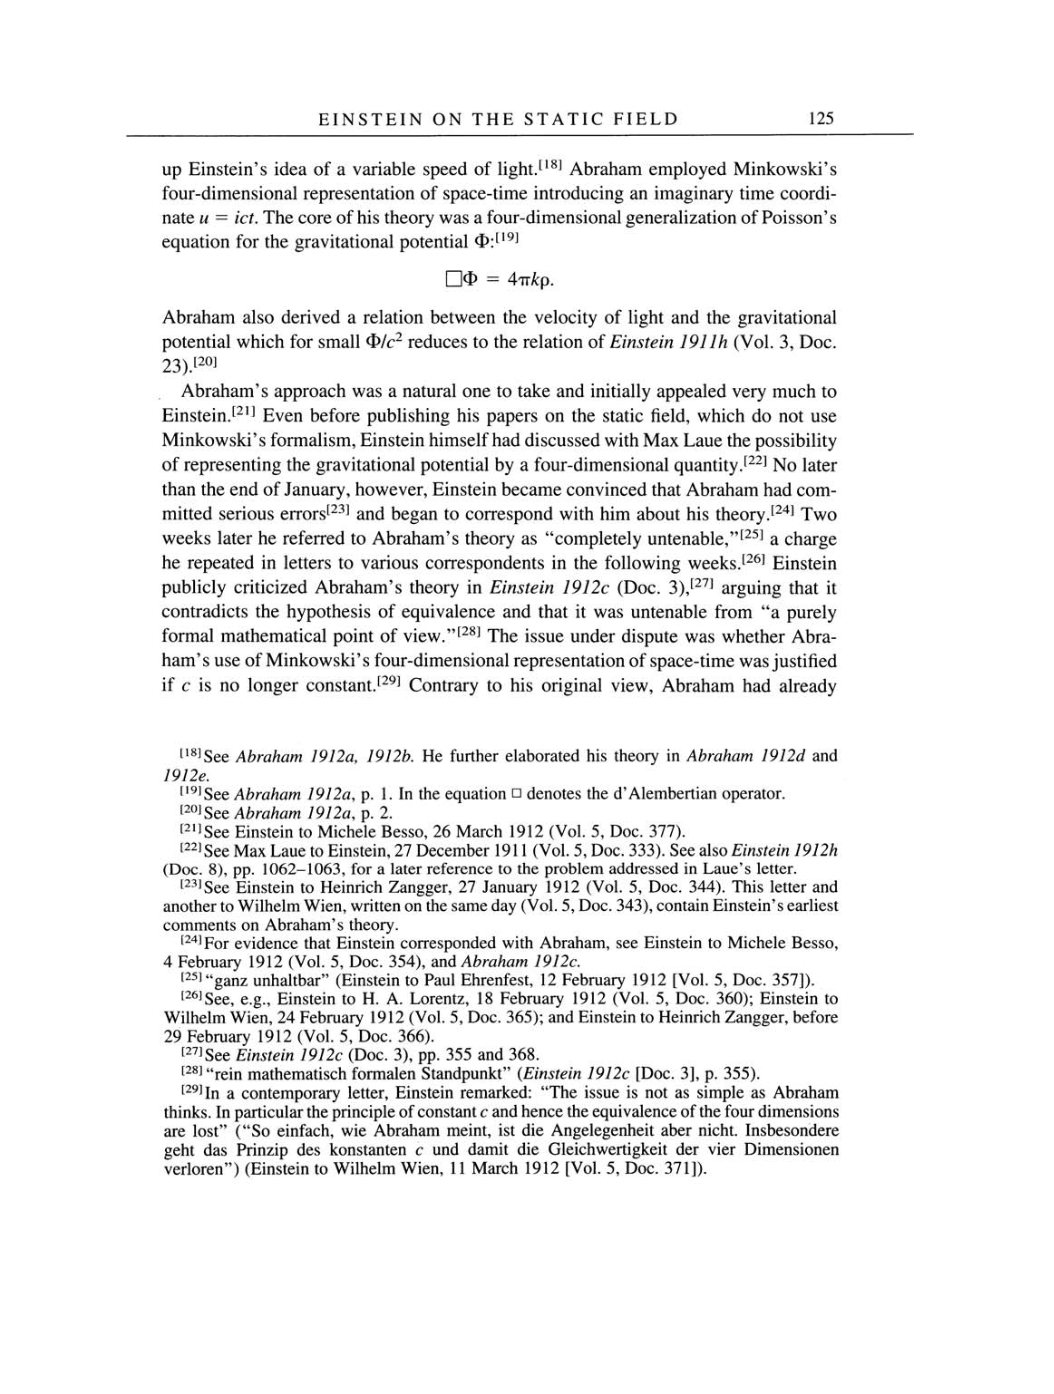 Volume 4: The Swiss Years: Writings 1912-1914 page 125